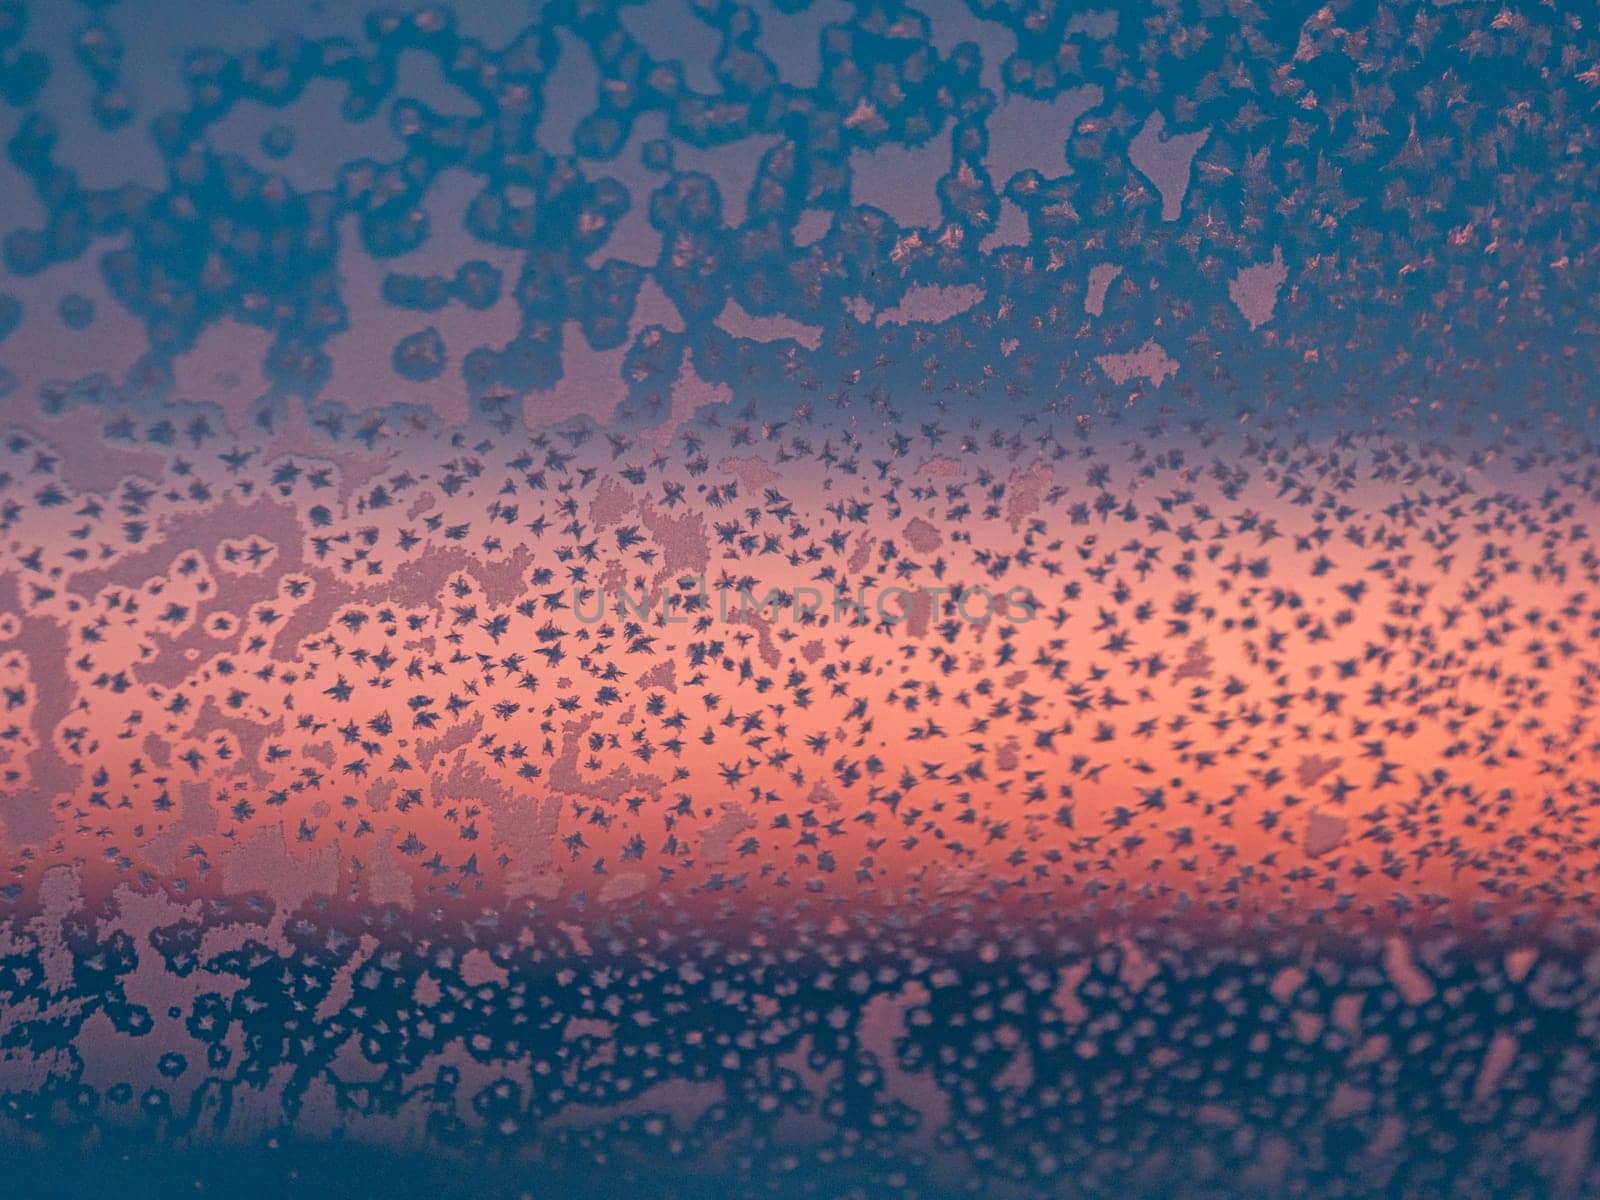 Frozen window with frost patterns overlooking colorful sunset in winter evening by Busker